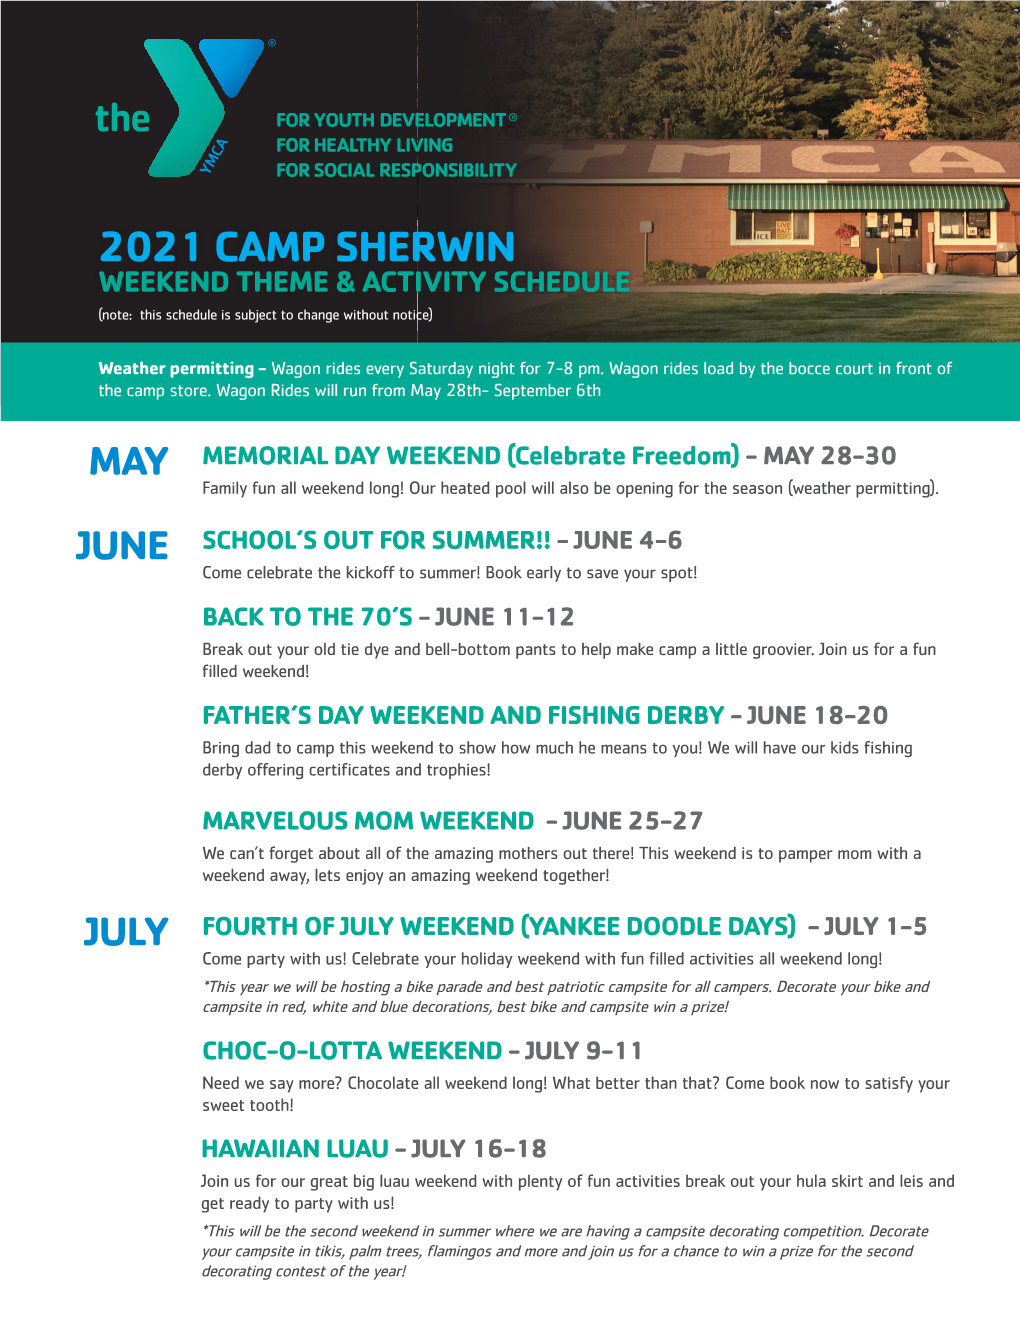 2021 CAMP SHERWIN WEEKEND THEME & ACTIVITY SCHEDULE (Note: This Schedule Is Subject to Change Without Notice)